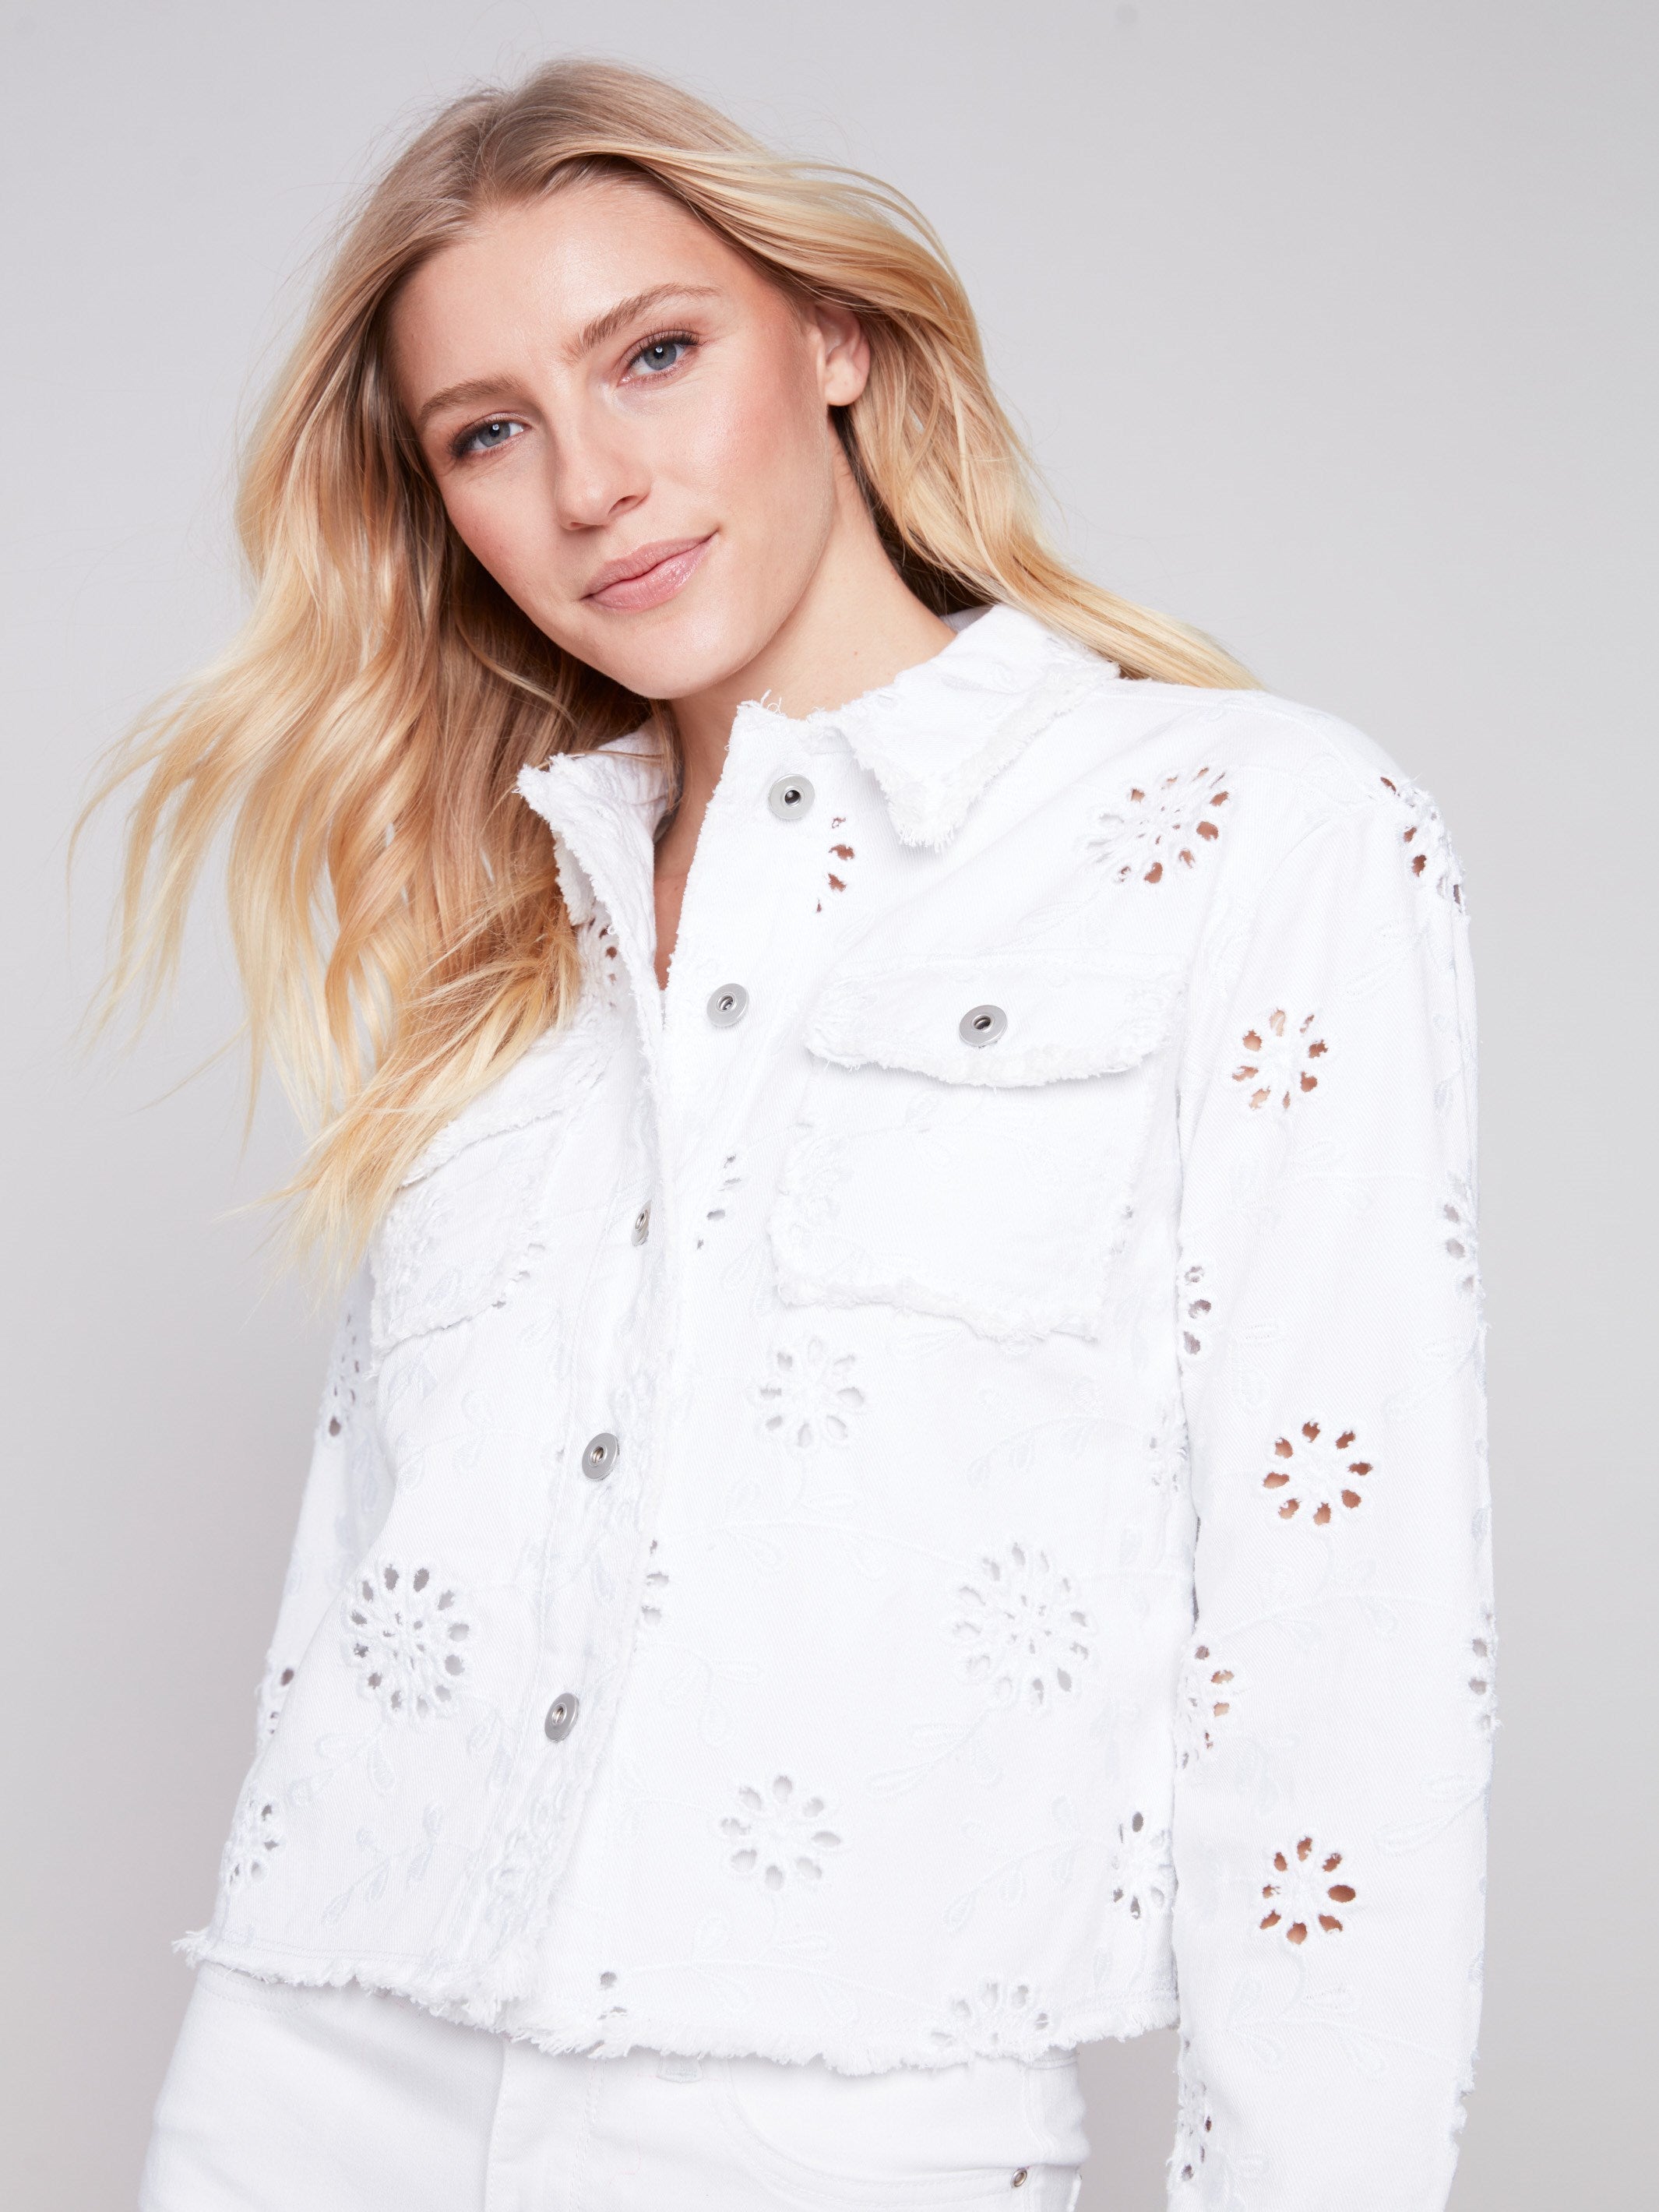 Embroidered Eyelet Denim Jacket - White - Charlie B Collection Canada - Image 4